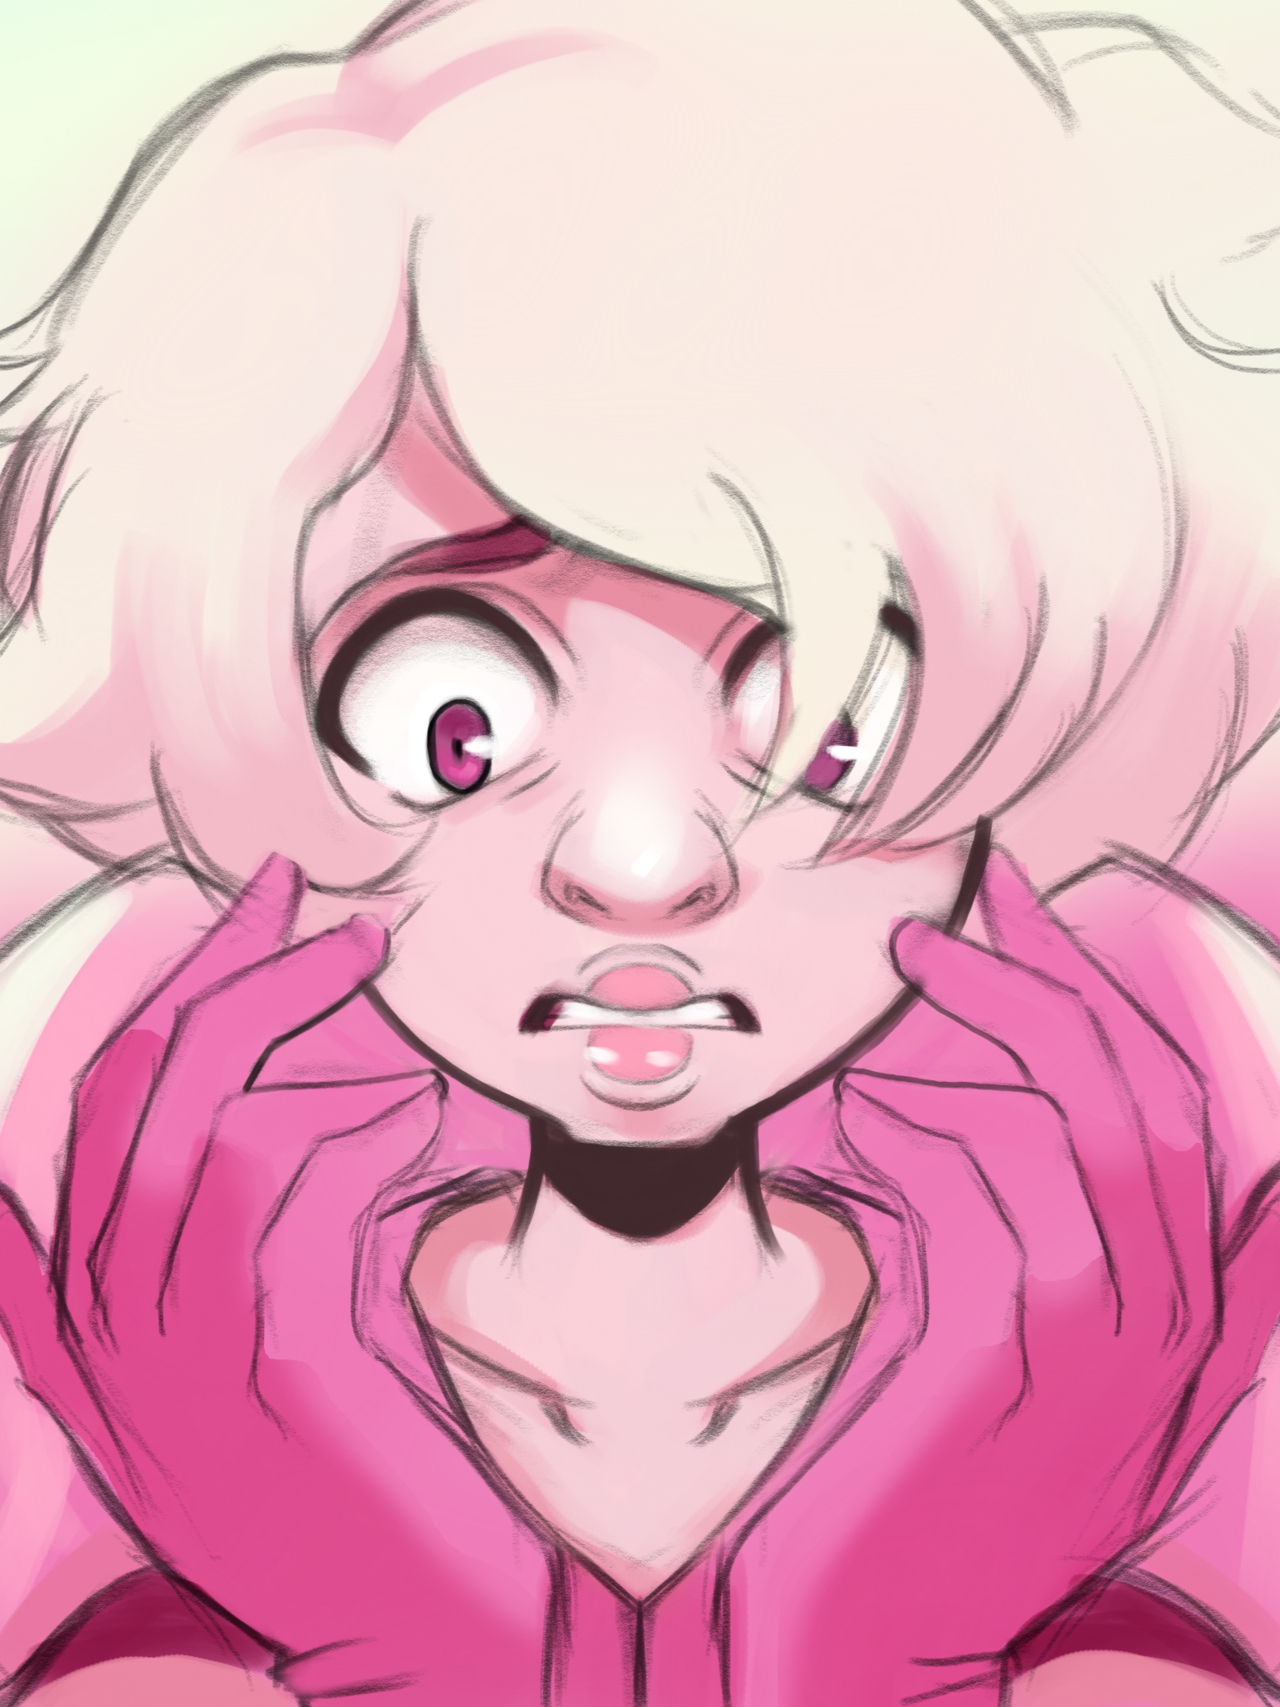 Some pink diamond anguish. I’d like to think she is actually good but given too much power too young.